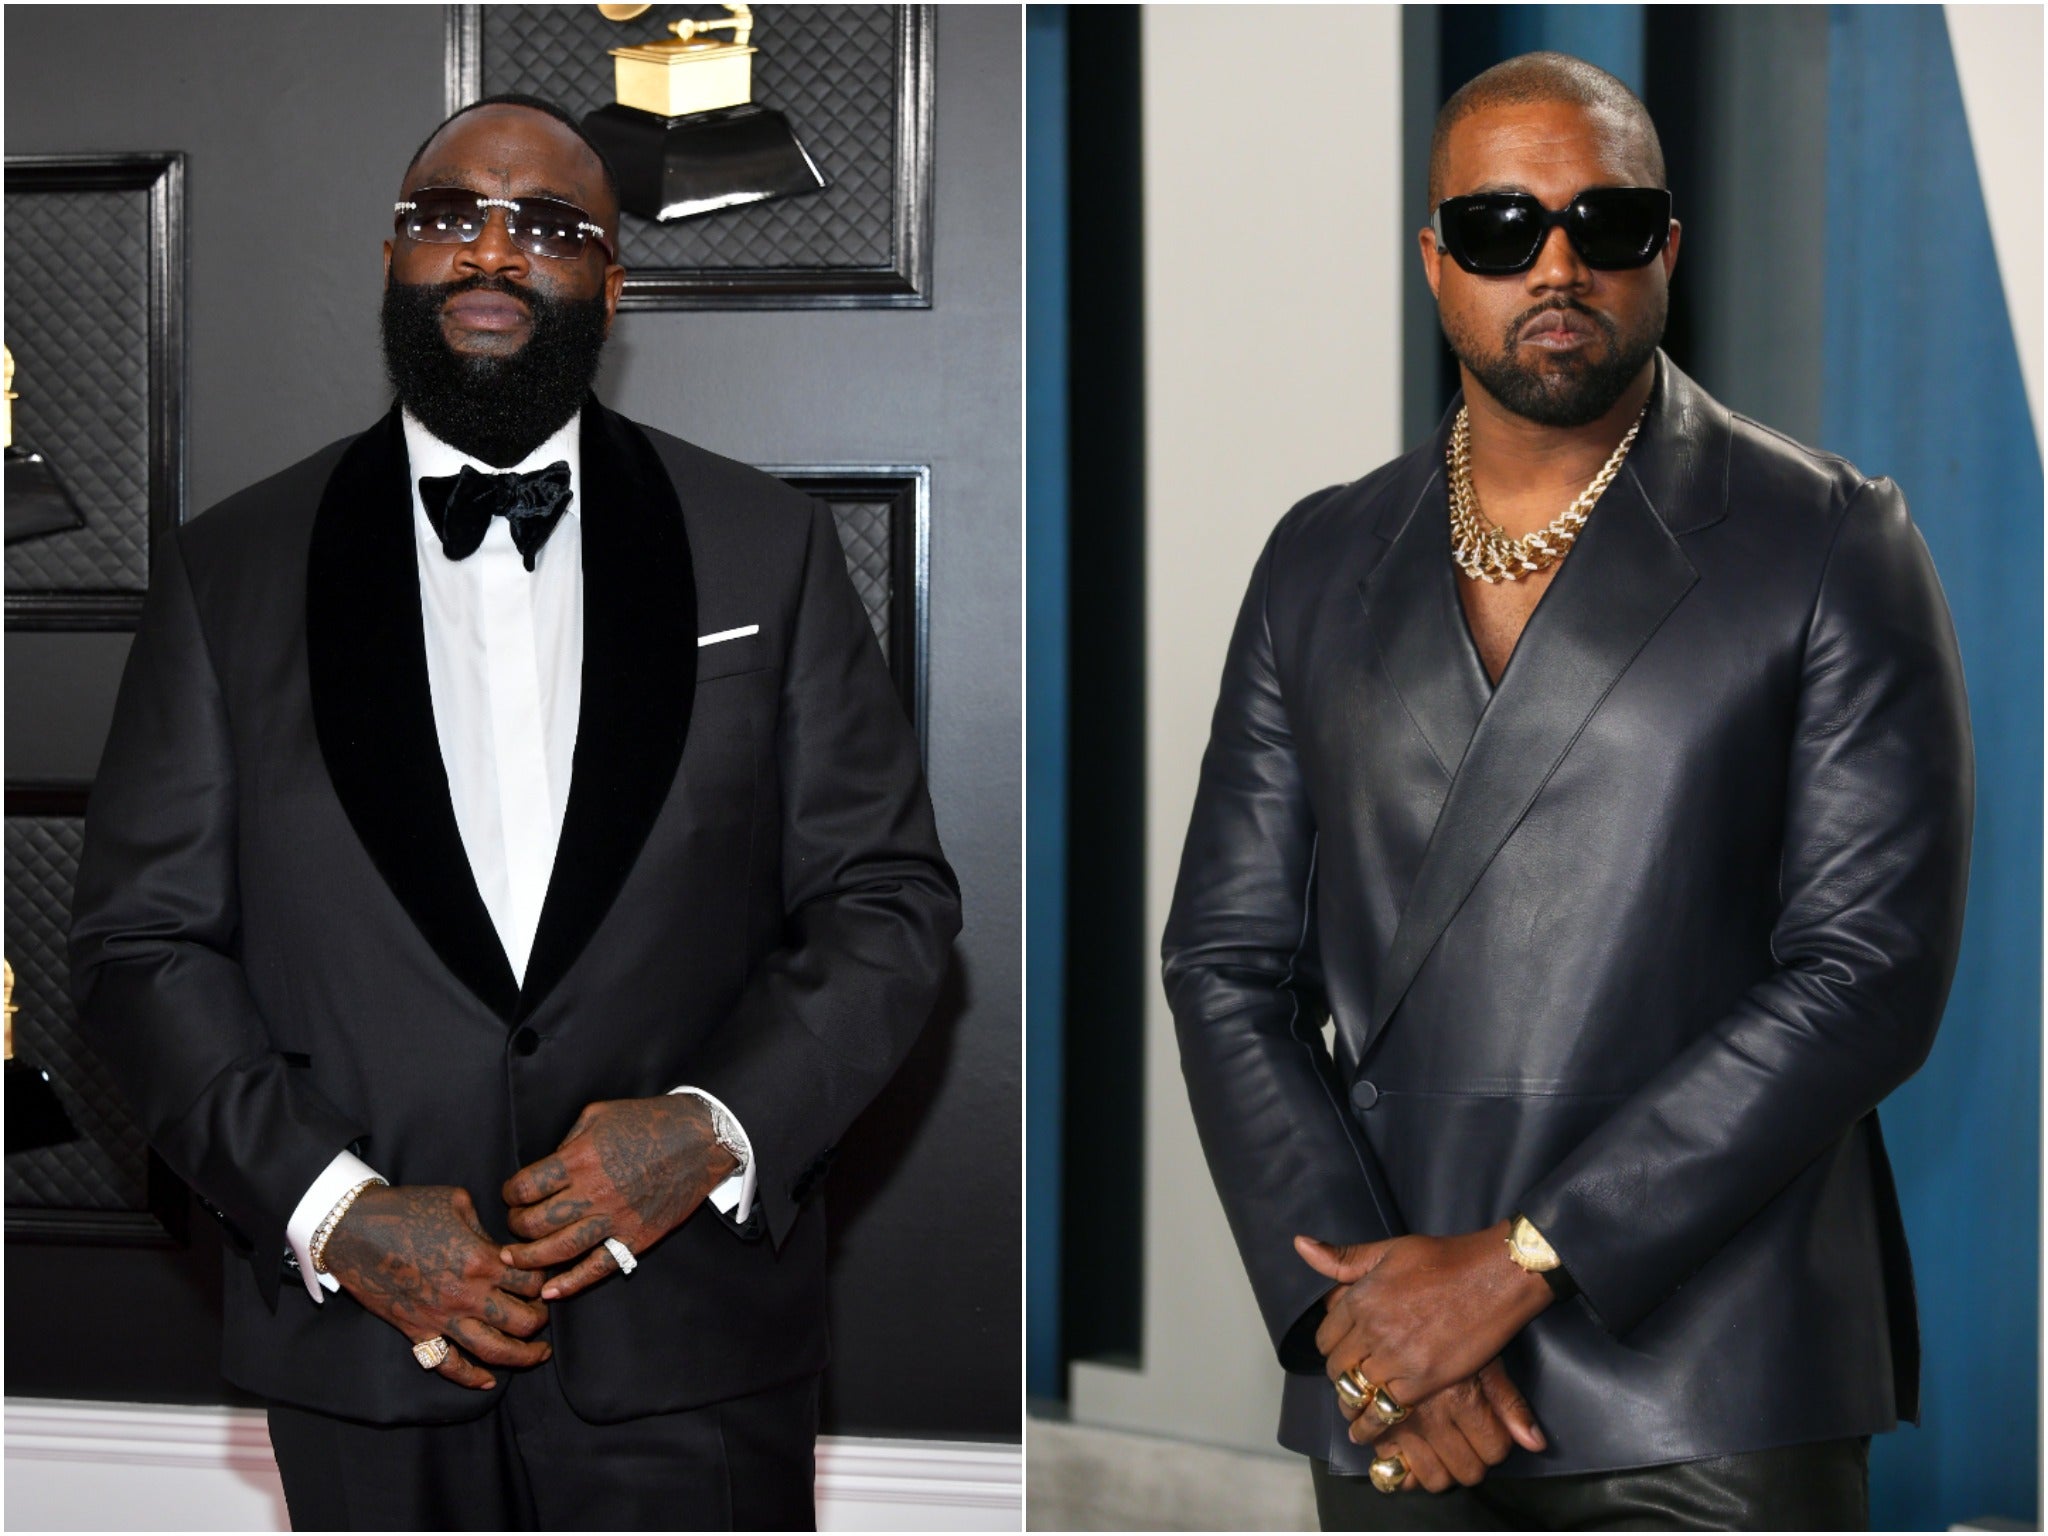 Rick Ross says Kanye West ‘mastered the art of manipulating media’ in new interview